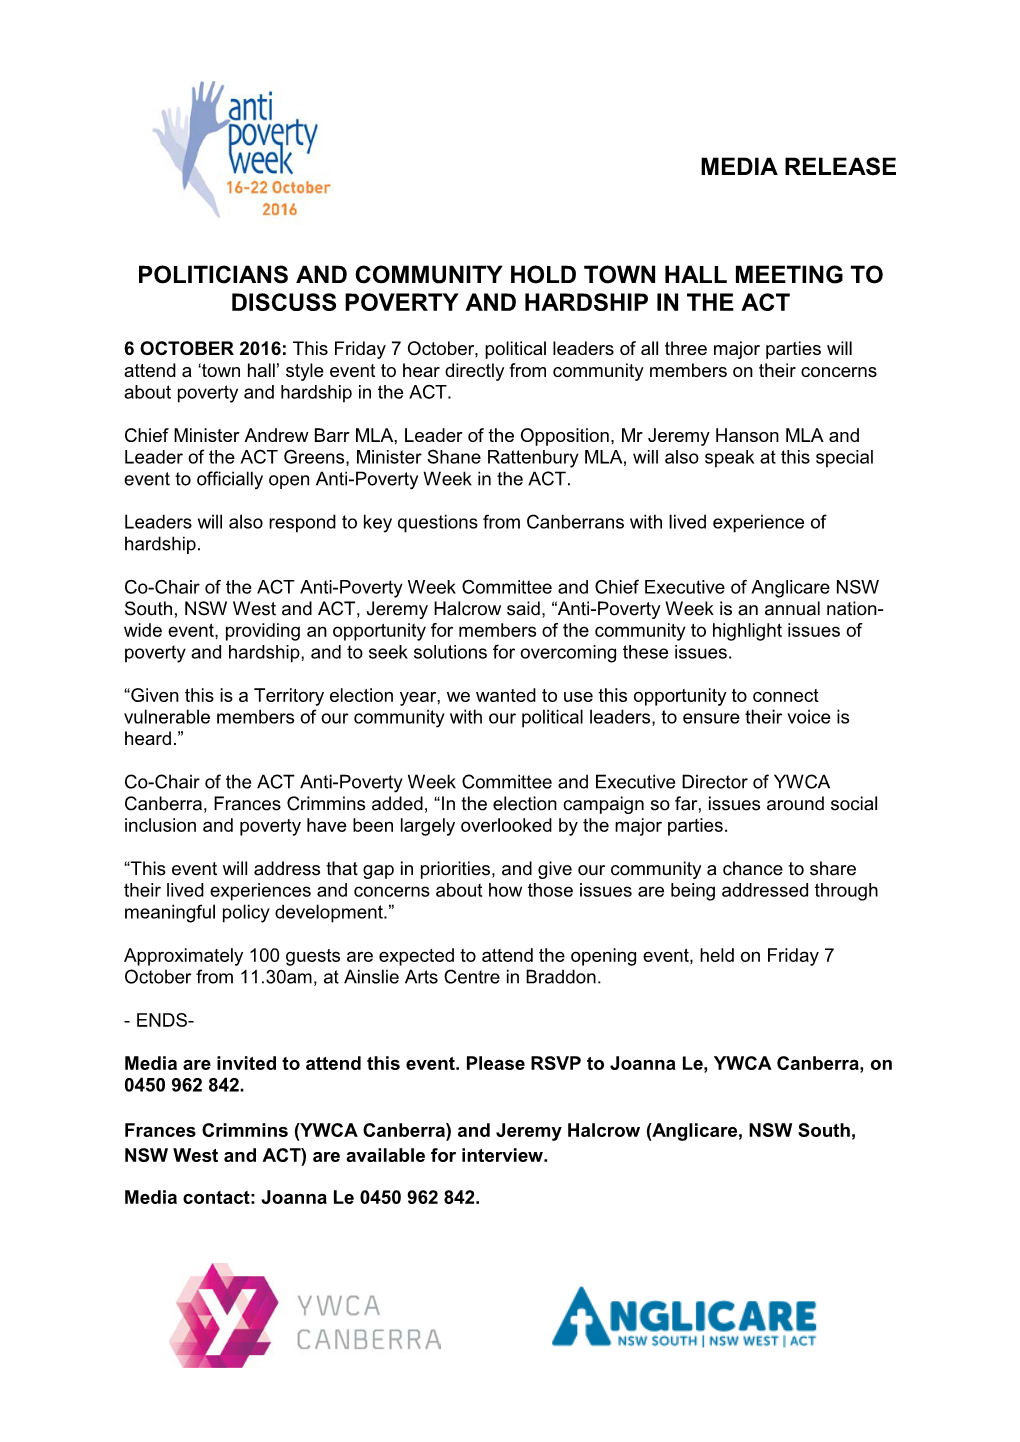 Media Release Politicians and Community Hold Town Hall